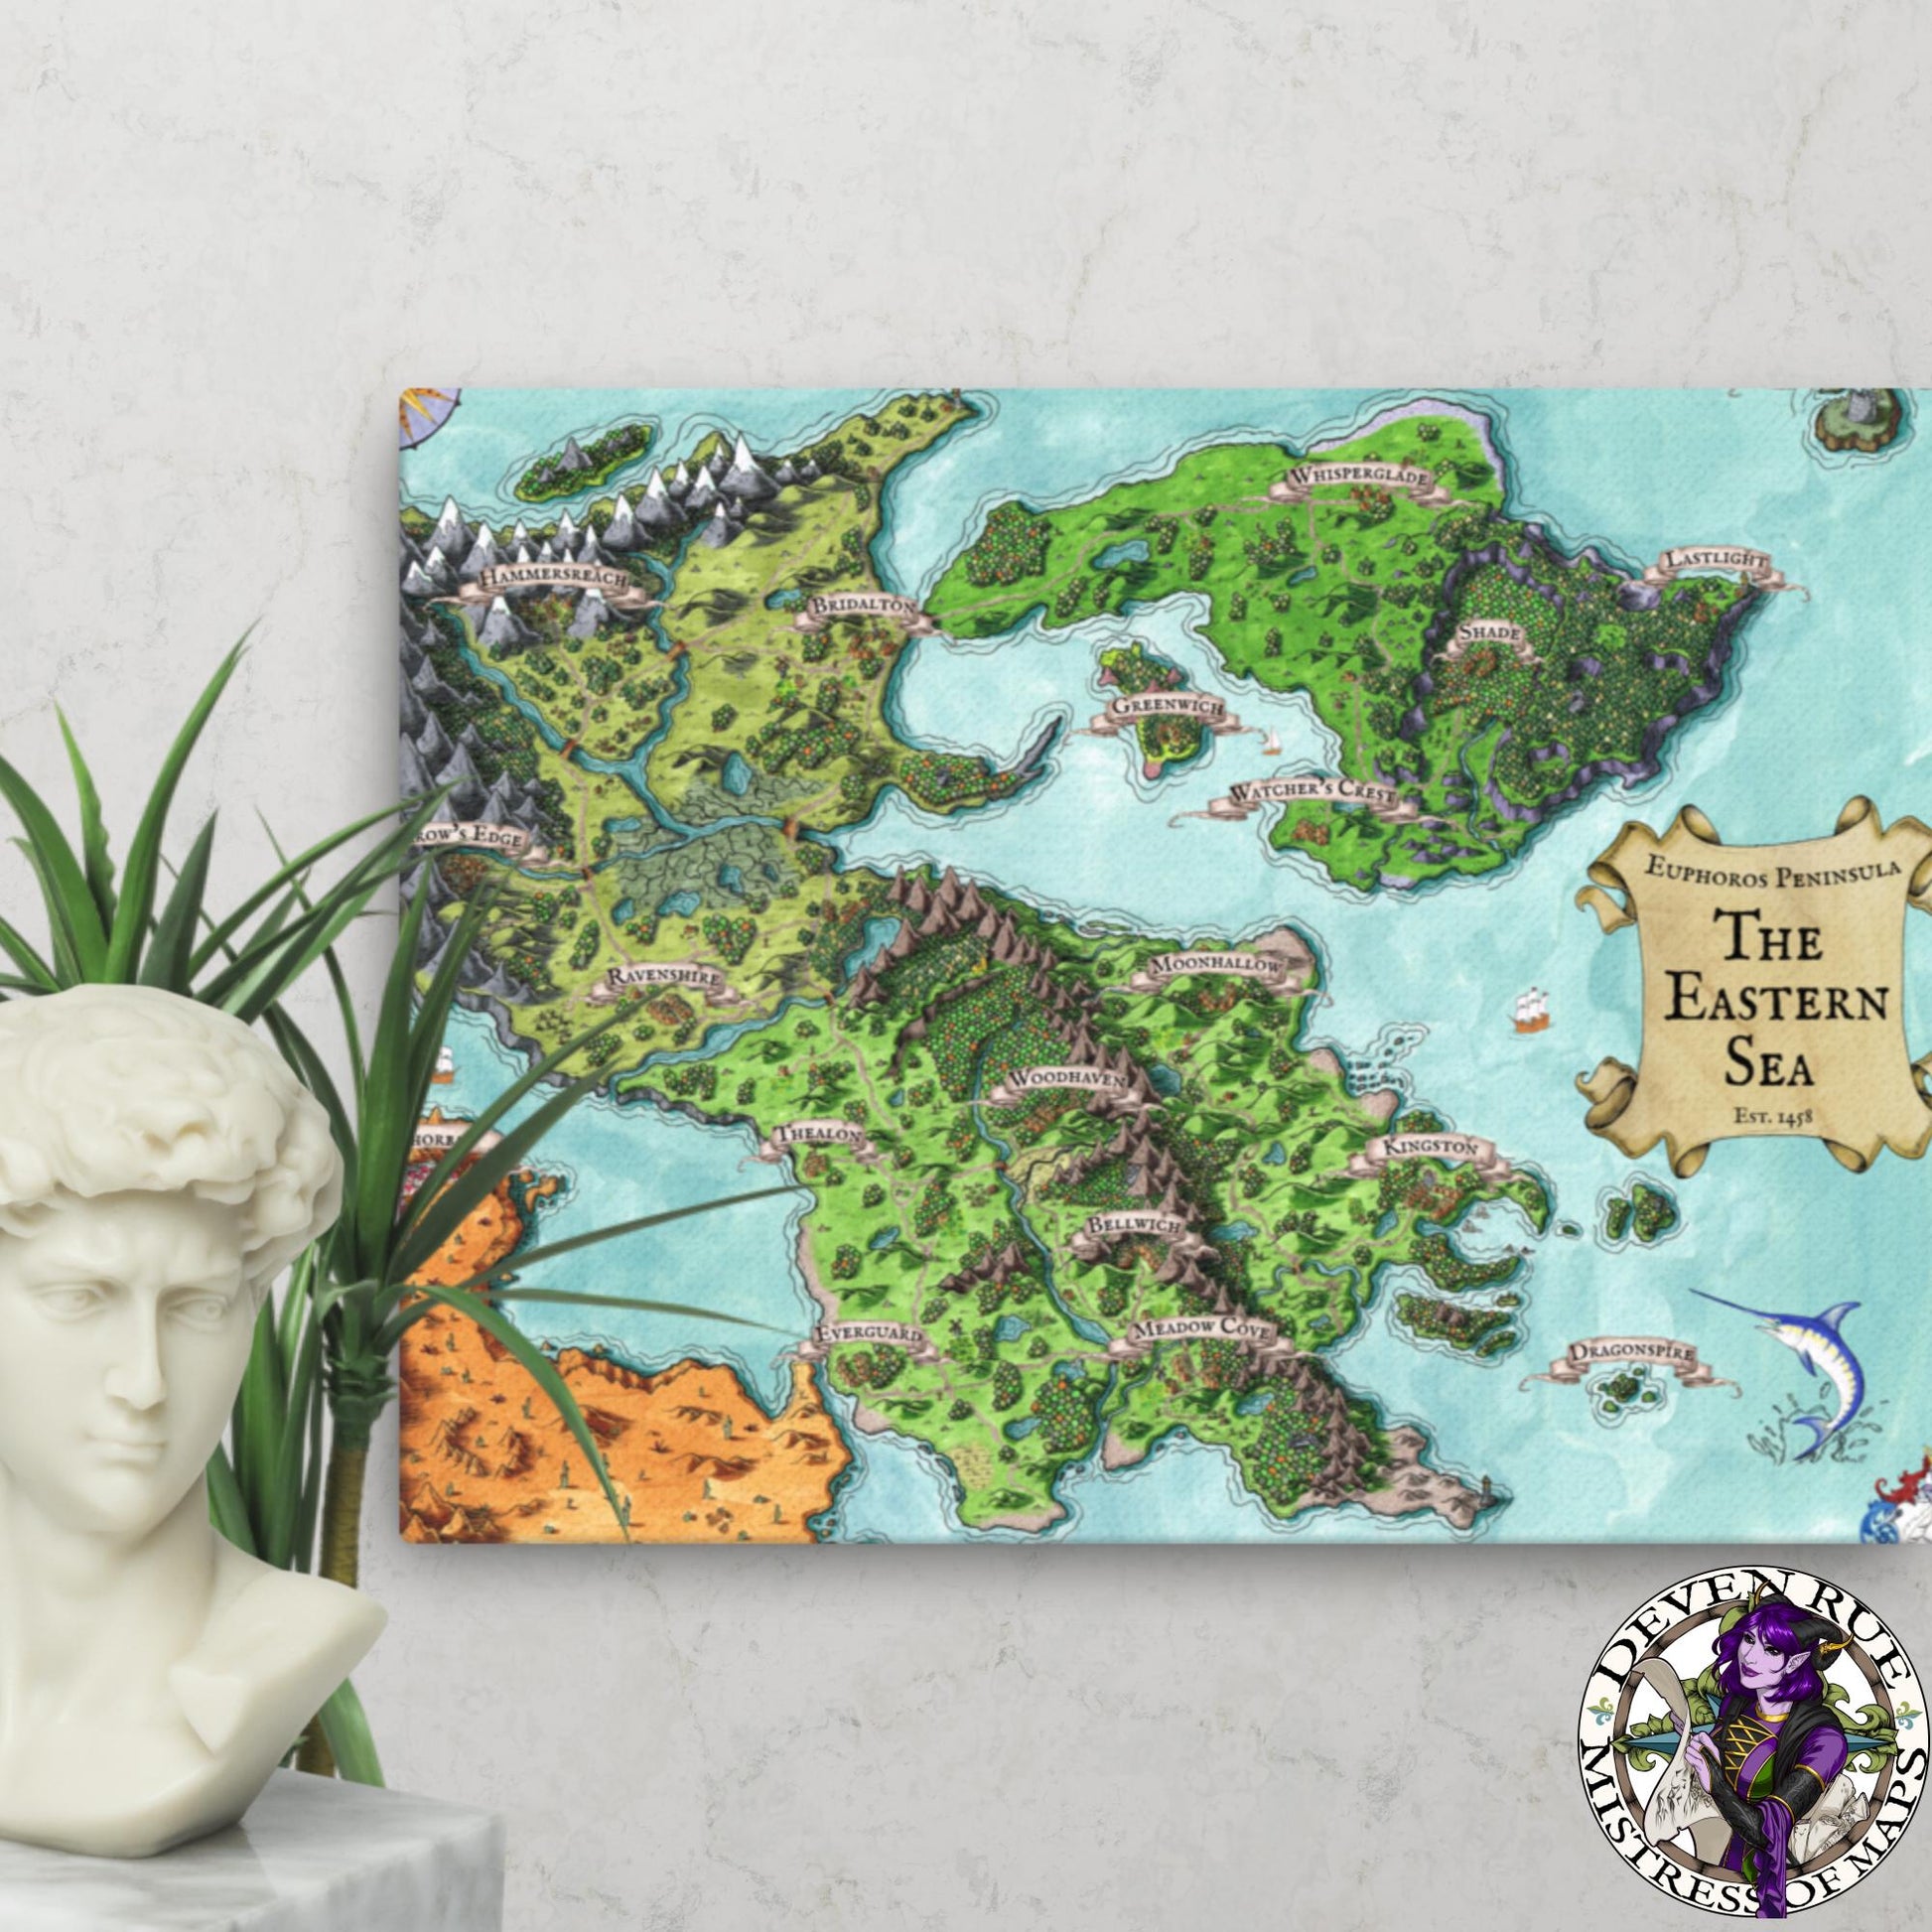 A 18" by 24" canvas print of the Euphoros map by Deven Rue hangs on a wall behind a plant and a bust statue.